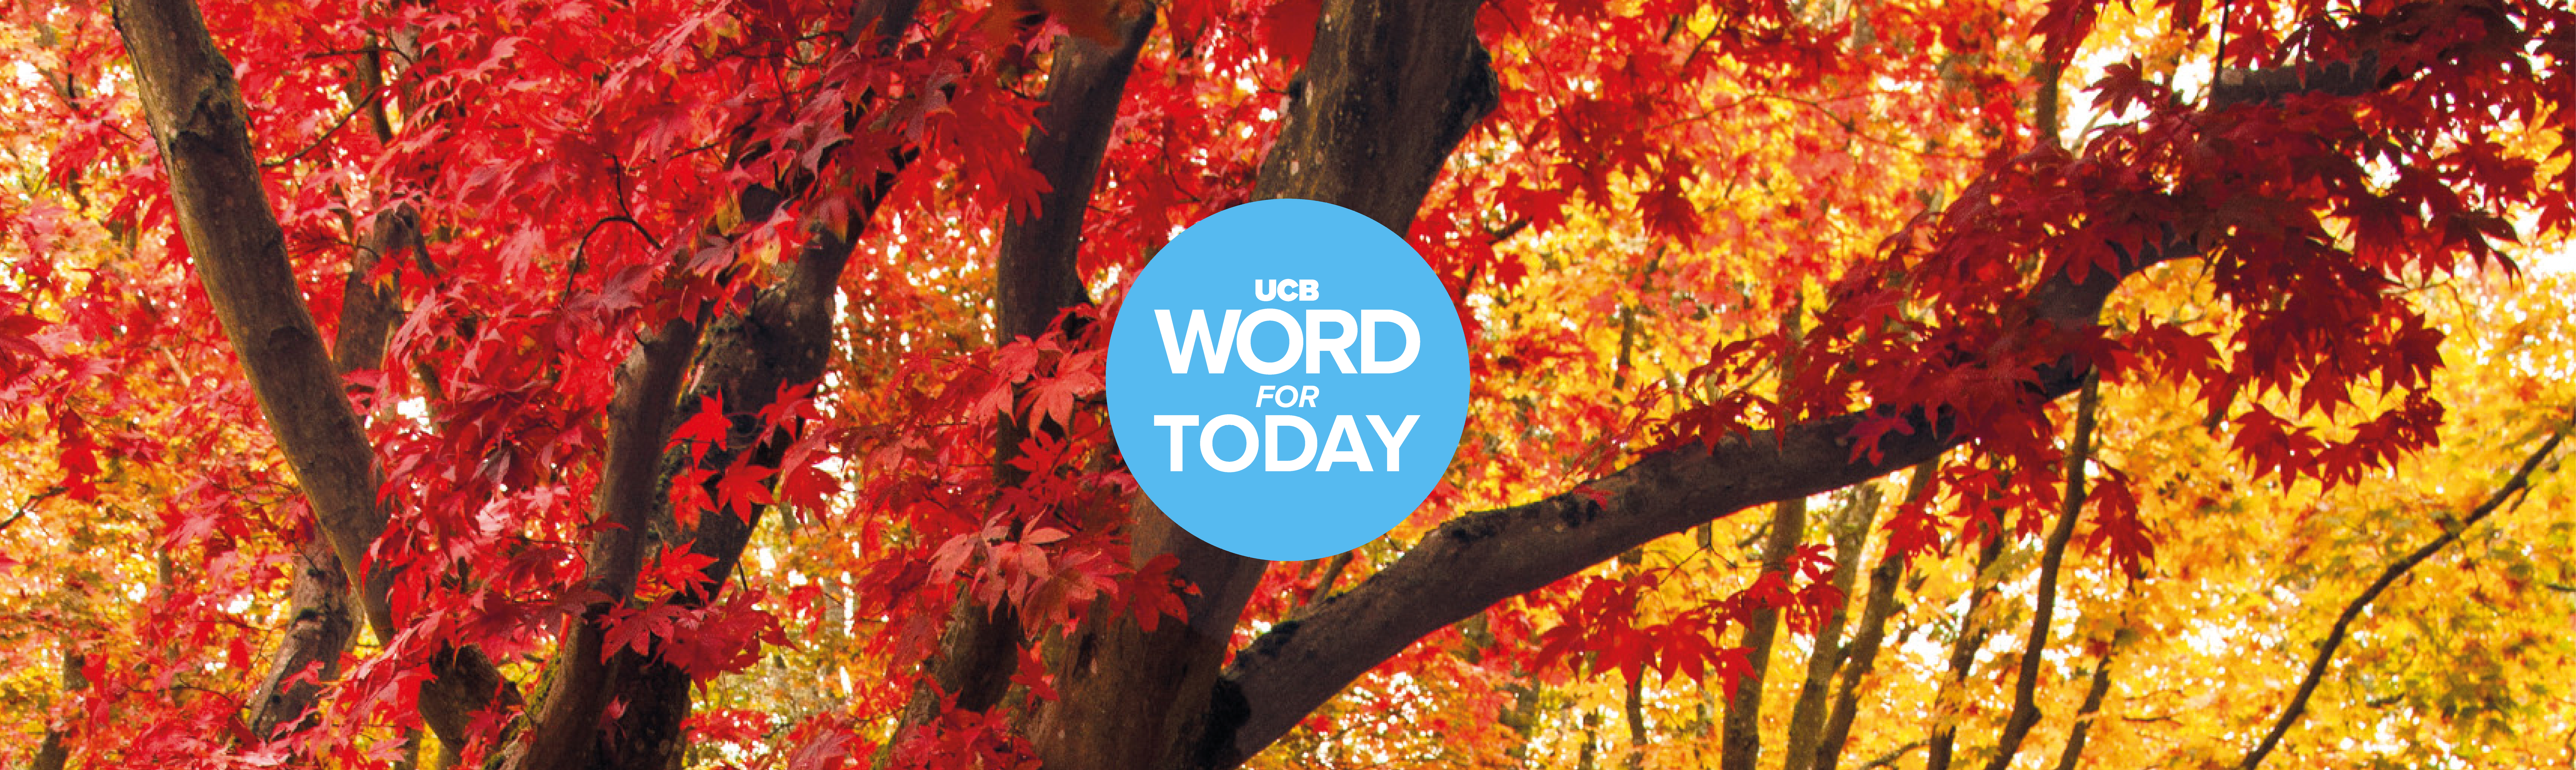 The UCB Word For Today